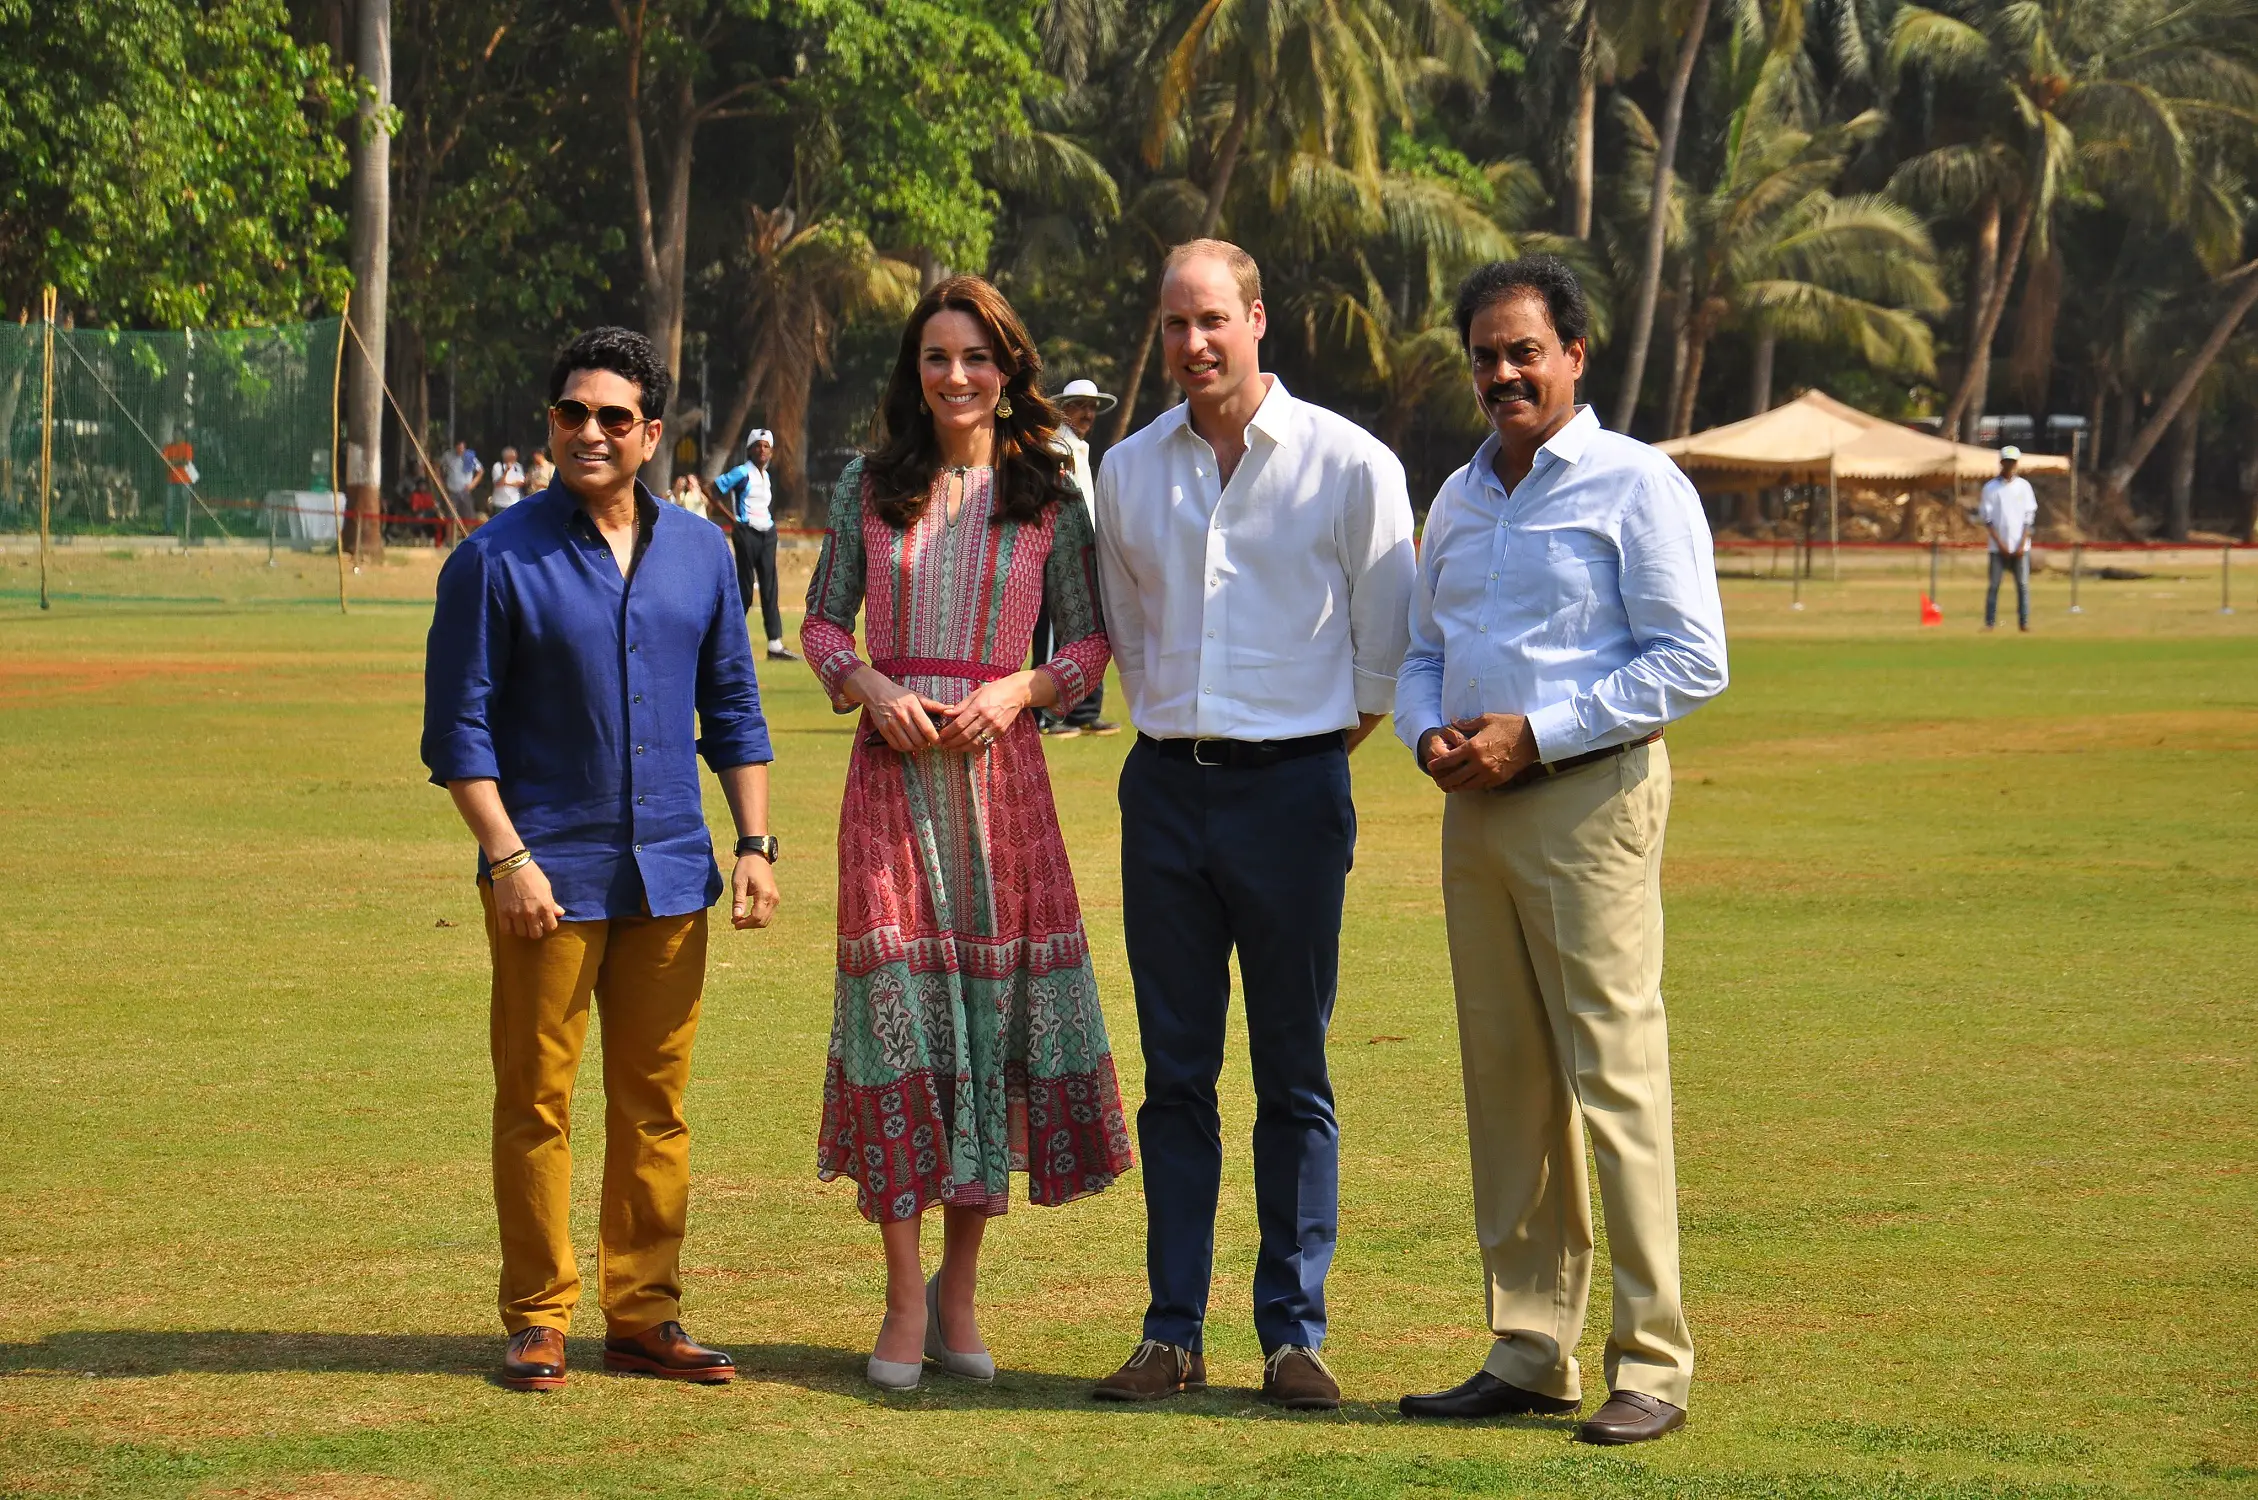 William and Catherine met with two iconic Indian Cricket players Sachin Tendulkar and Dilip Vengsarkar